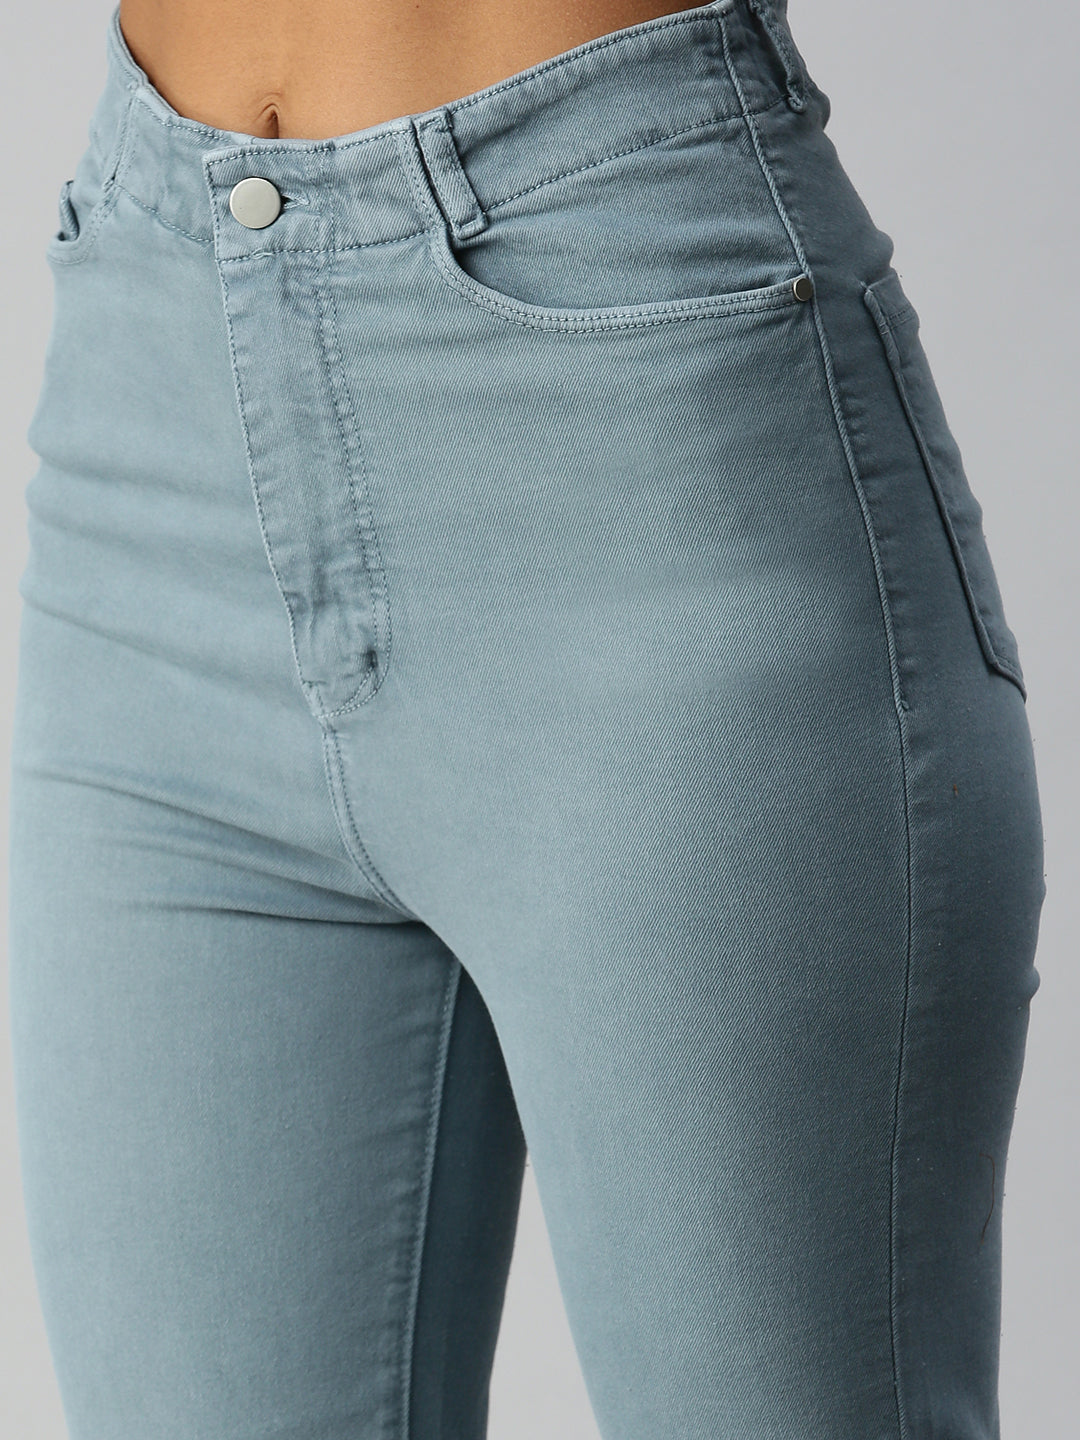 Women's Blue Solid Denim Relaxed Jeans